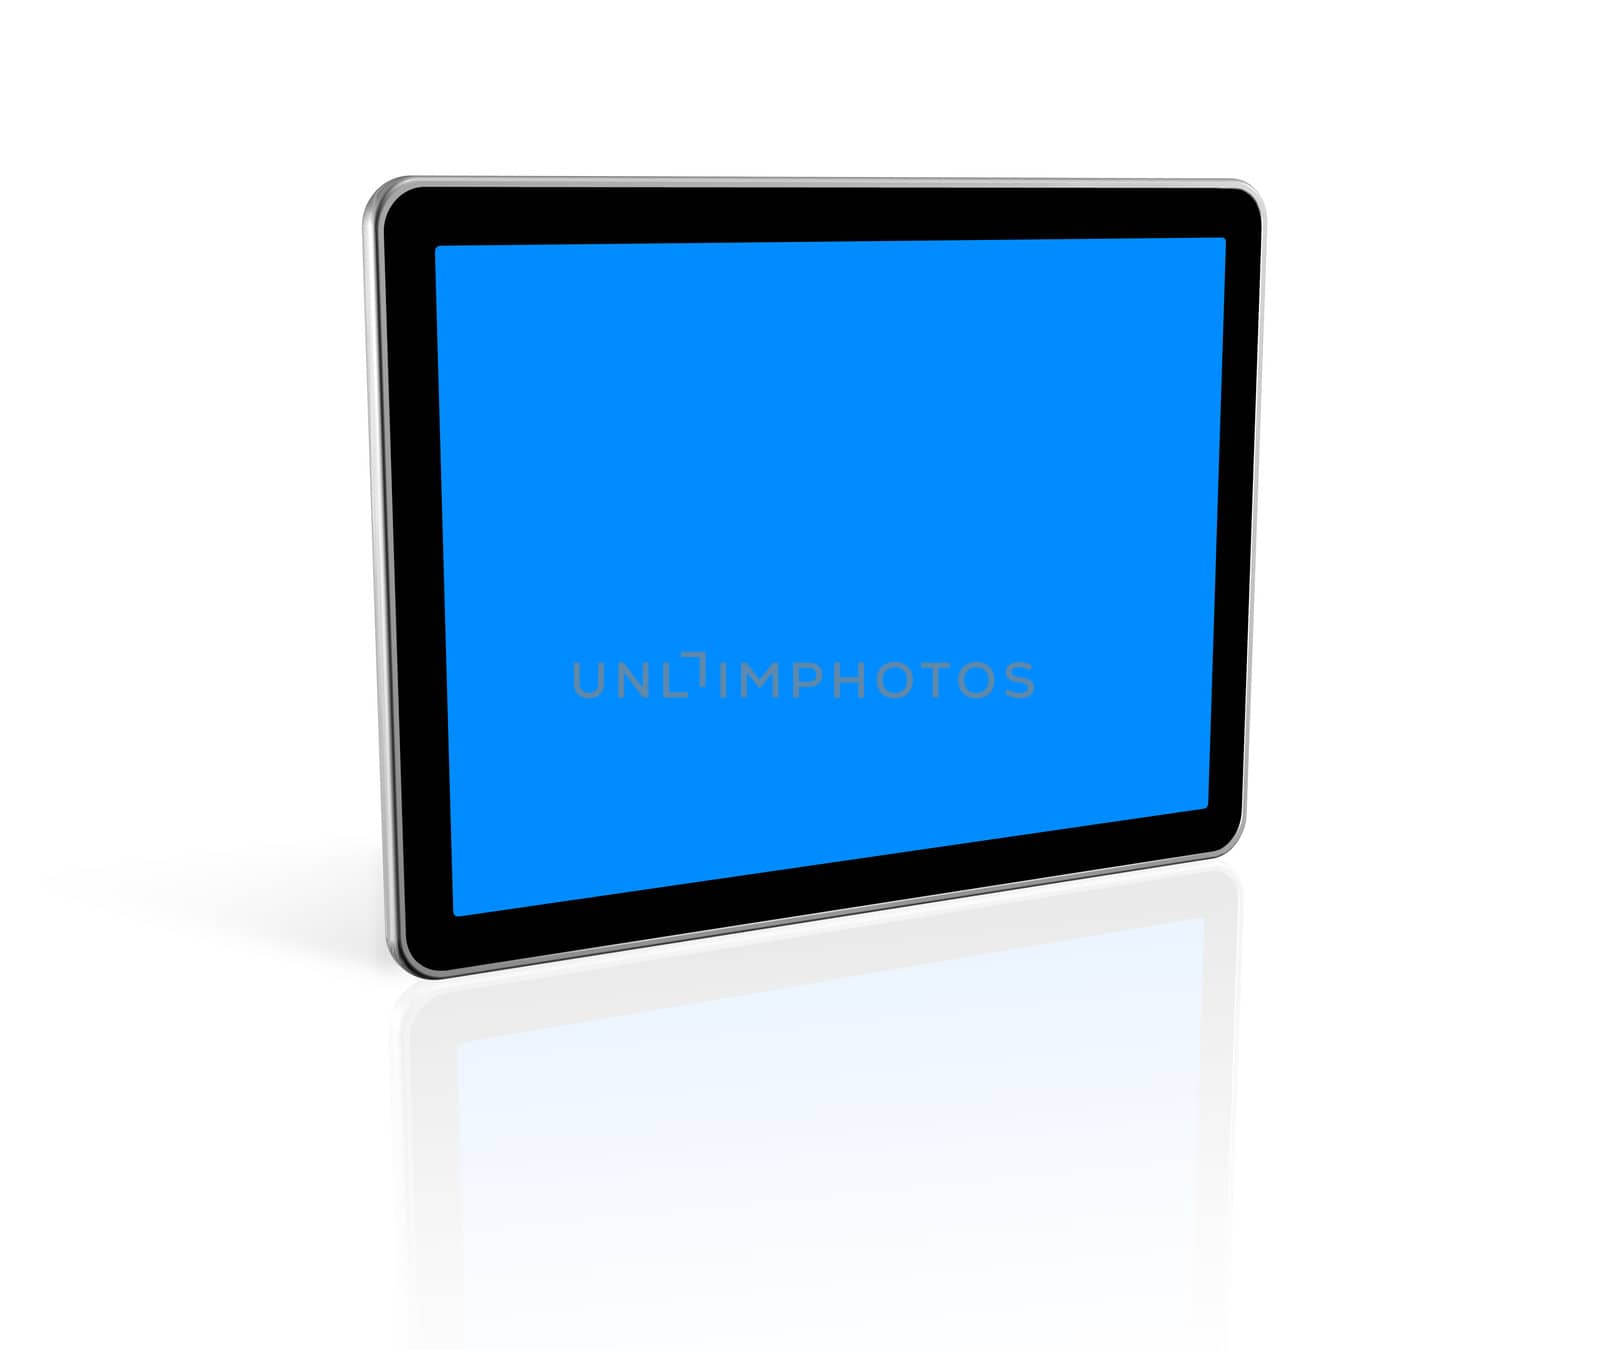 3D television, computer screen isolated on white.  With 2 clipping paths : global scene clipping path and screens clipping path to place your designs or pictures